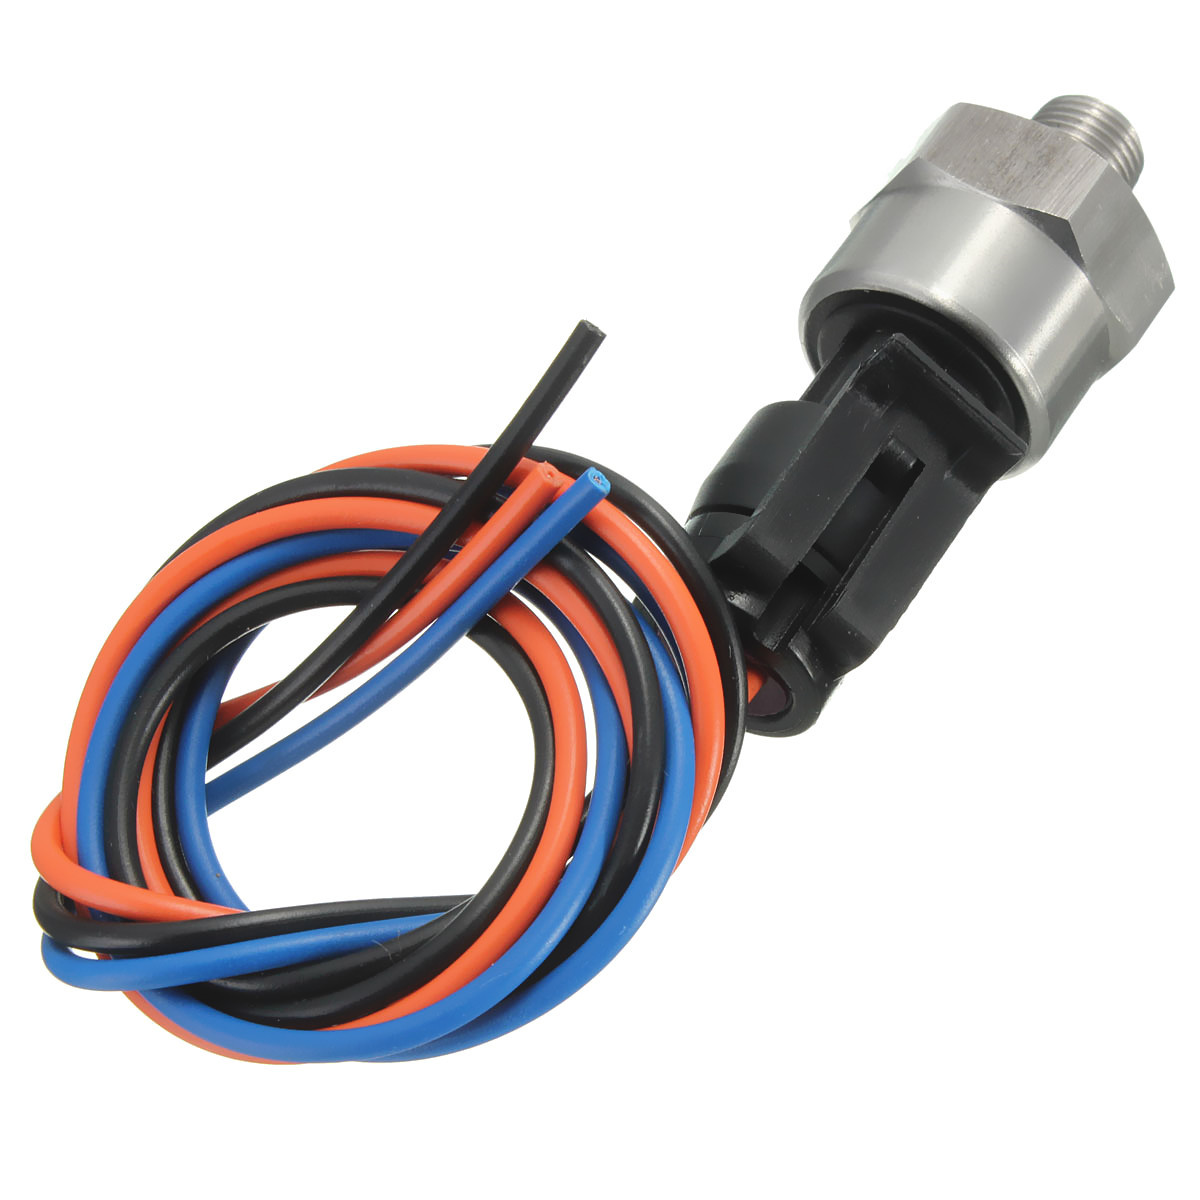 

100Psi Pressure Transducer Sensor for Oil Fuel Diesel Gas Air Water